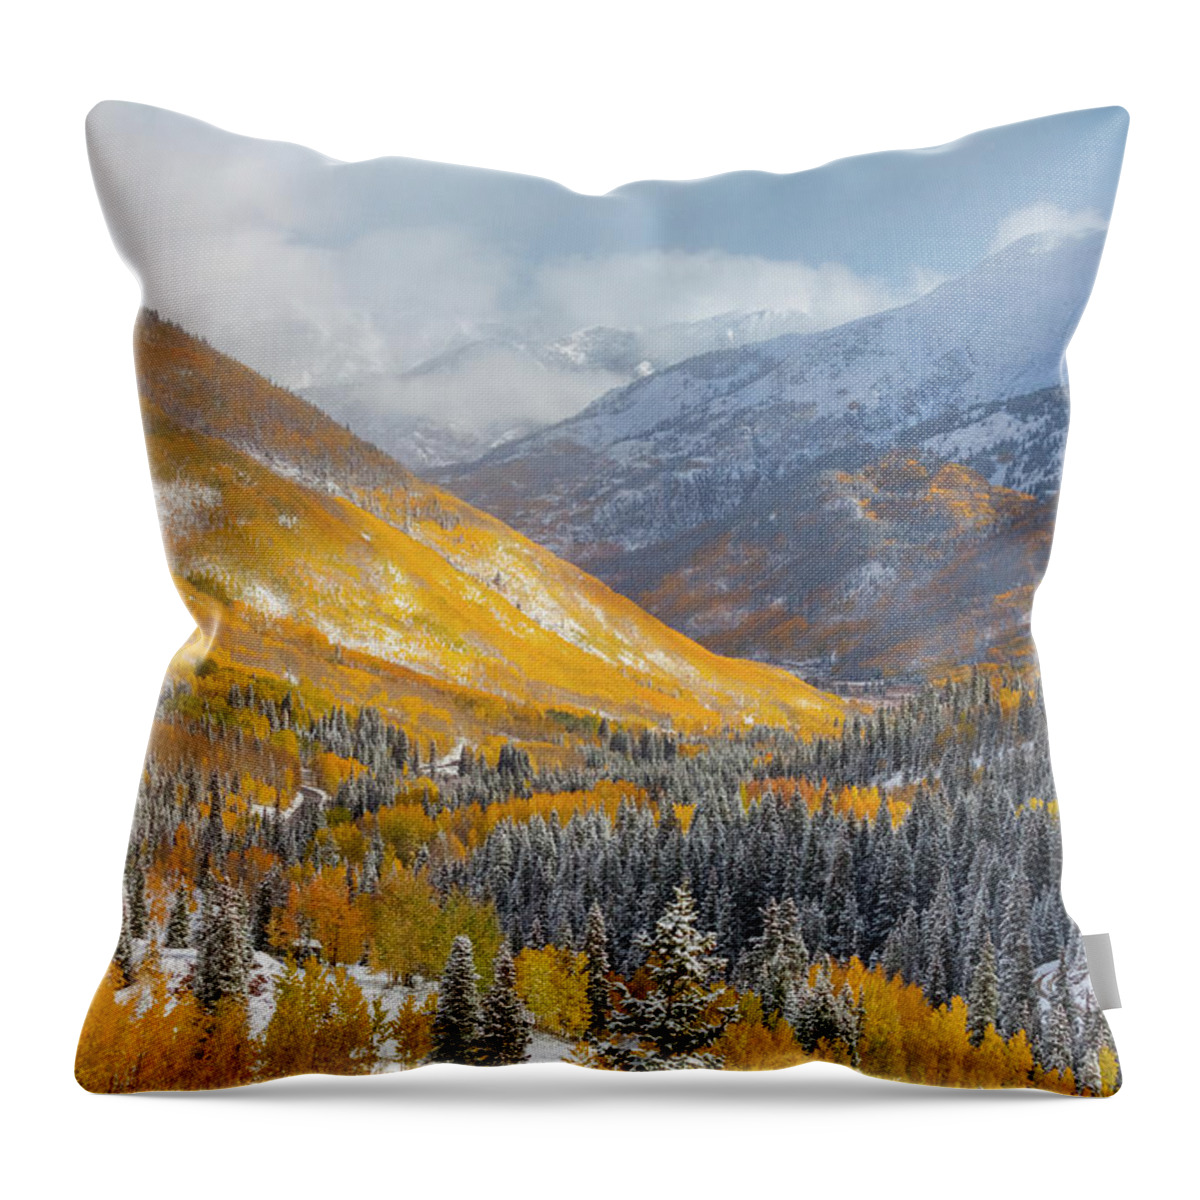 Aspen Trees Throw Pillow featuring the photograph Million Dollar Drive by Darren White